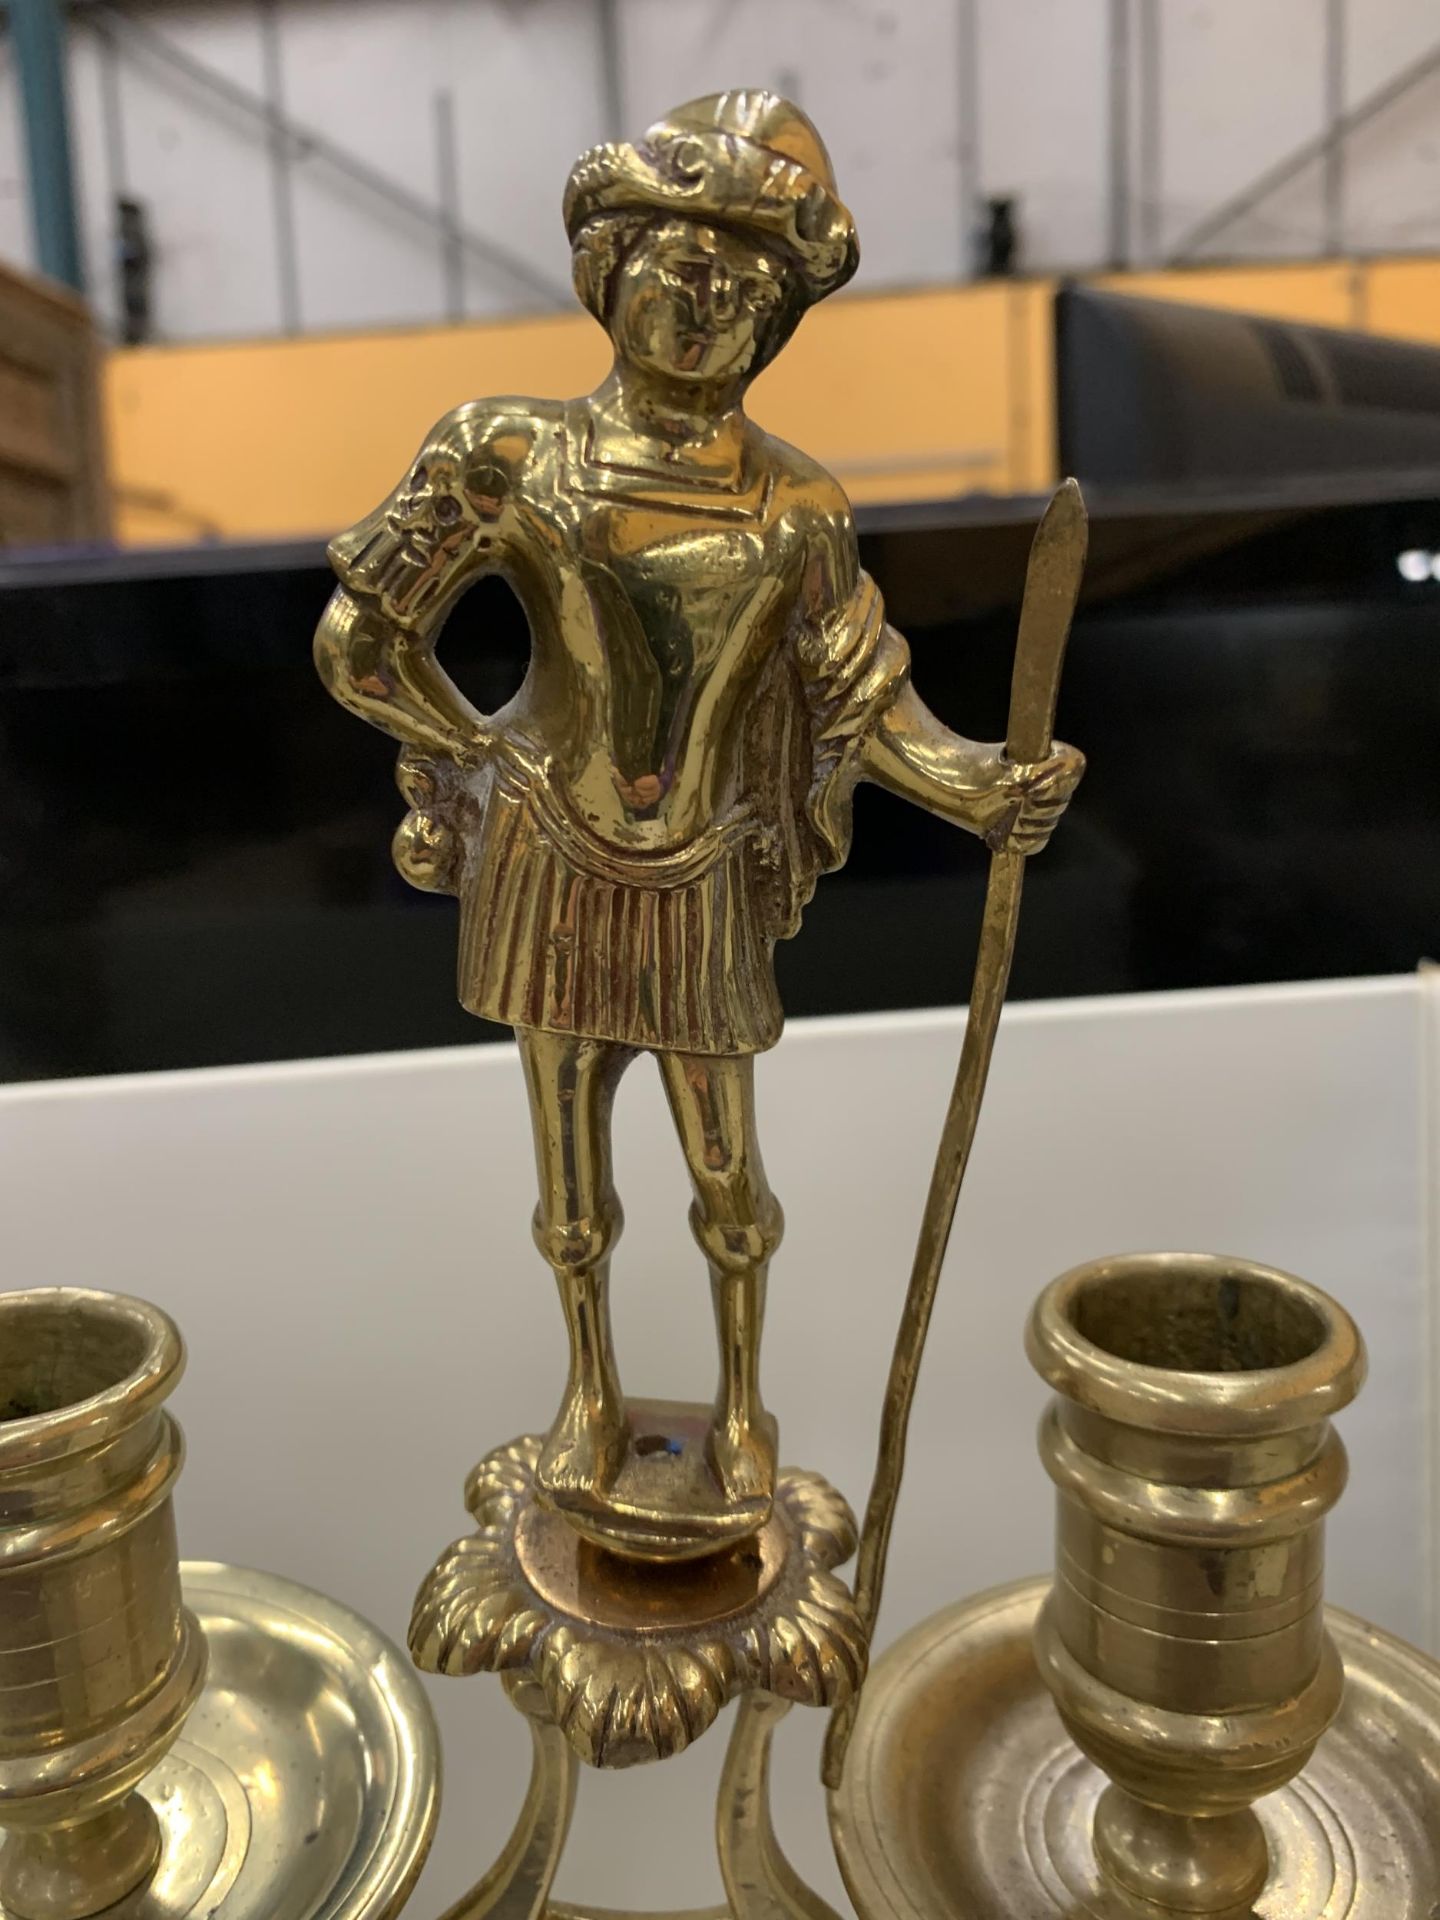 A HEAVY BRASS CANDELABRA WITH A FIGURE HOLDING A STAFF - Image 2 of 5